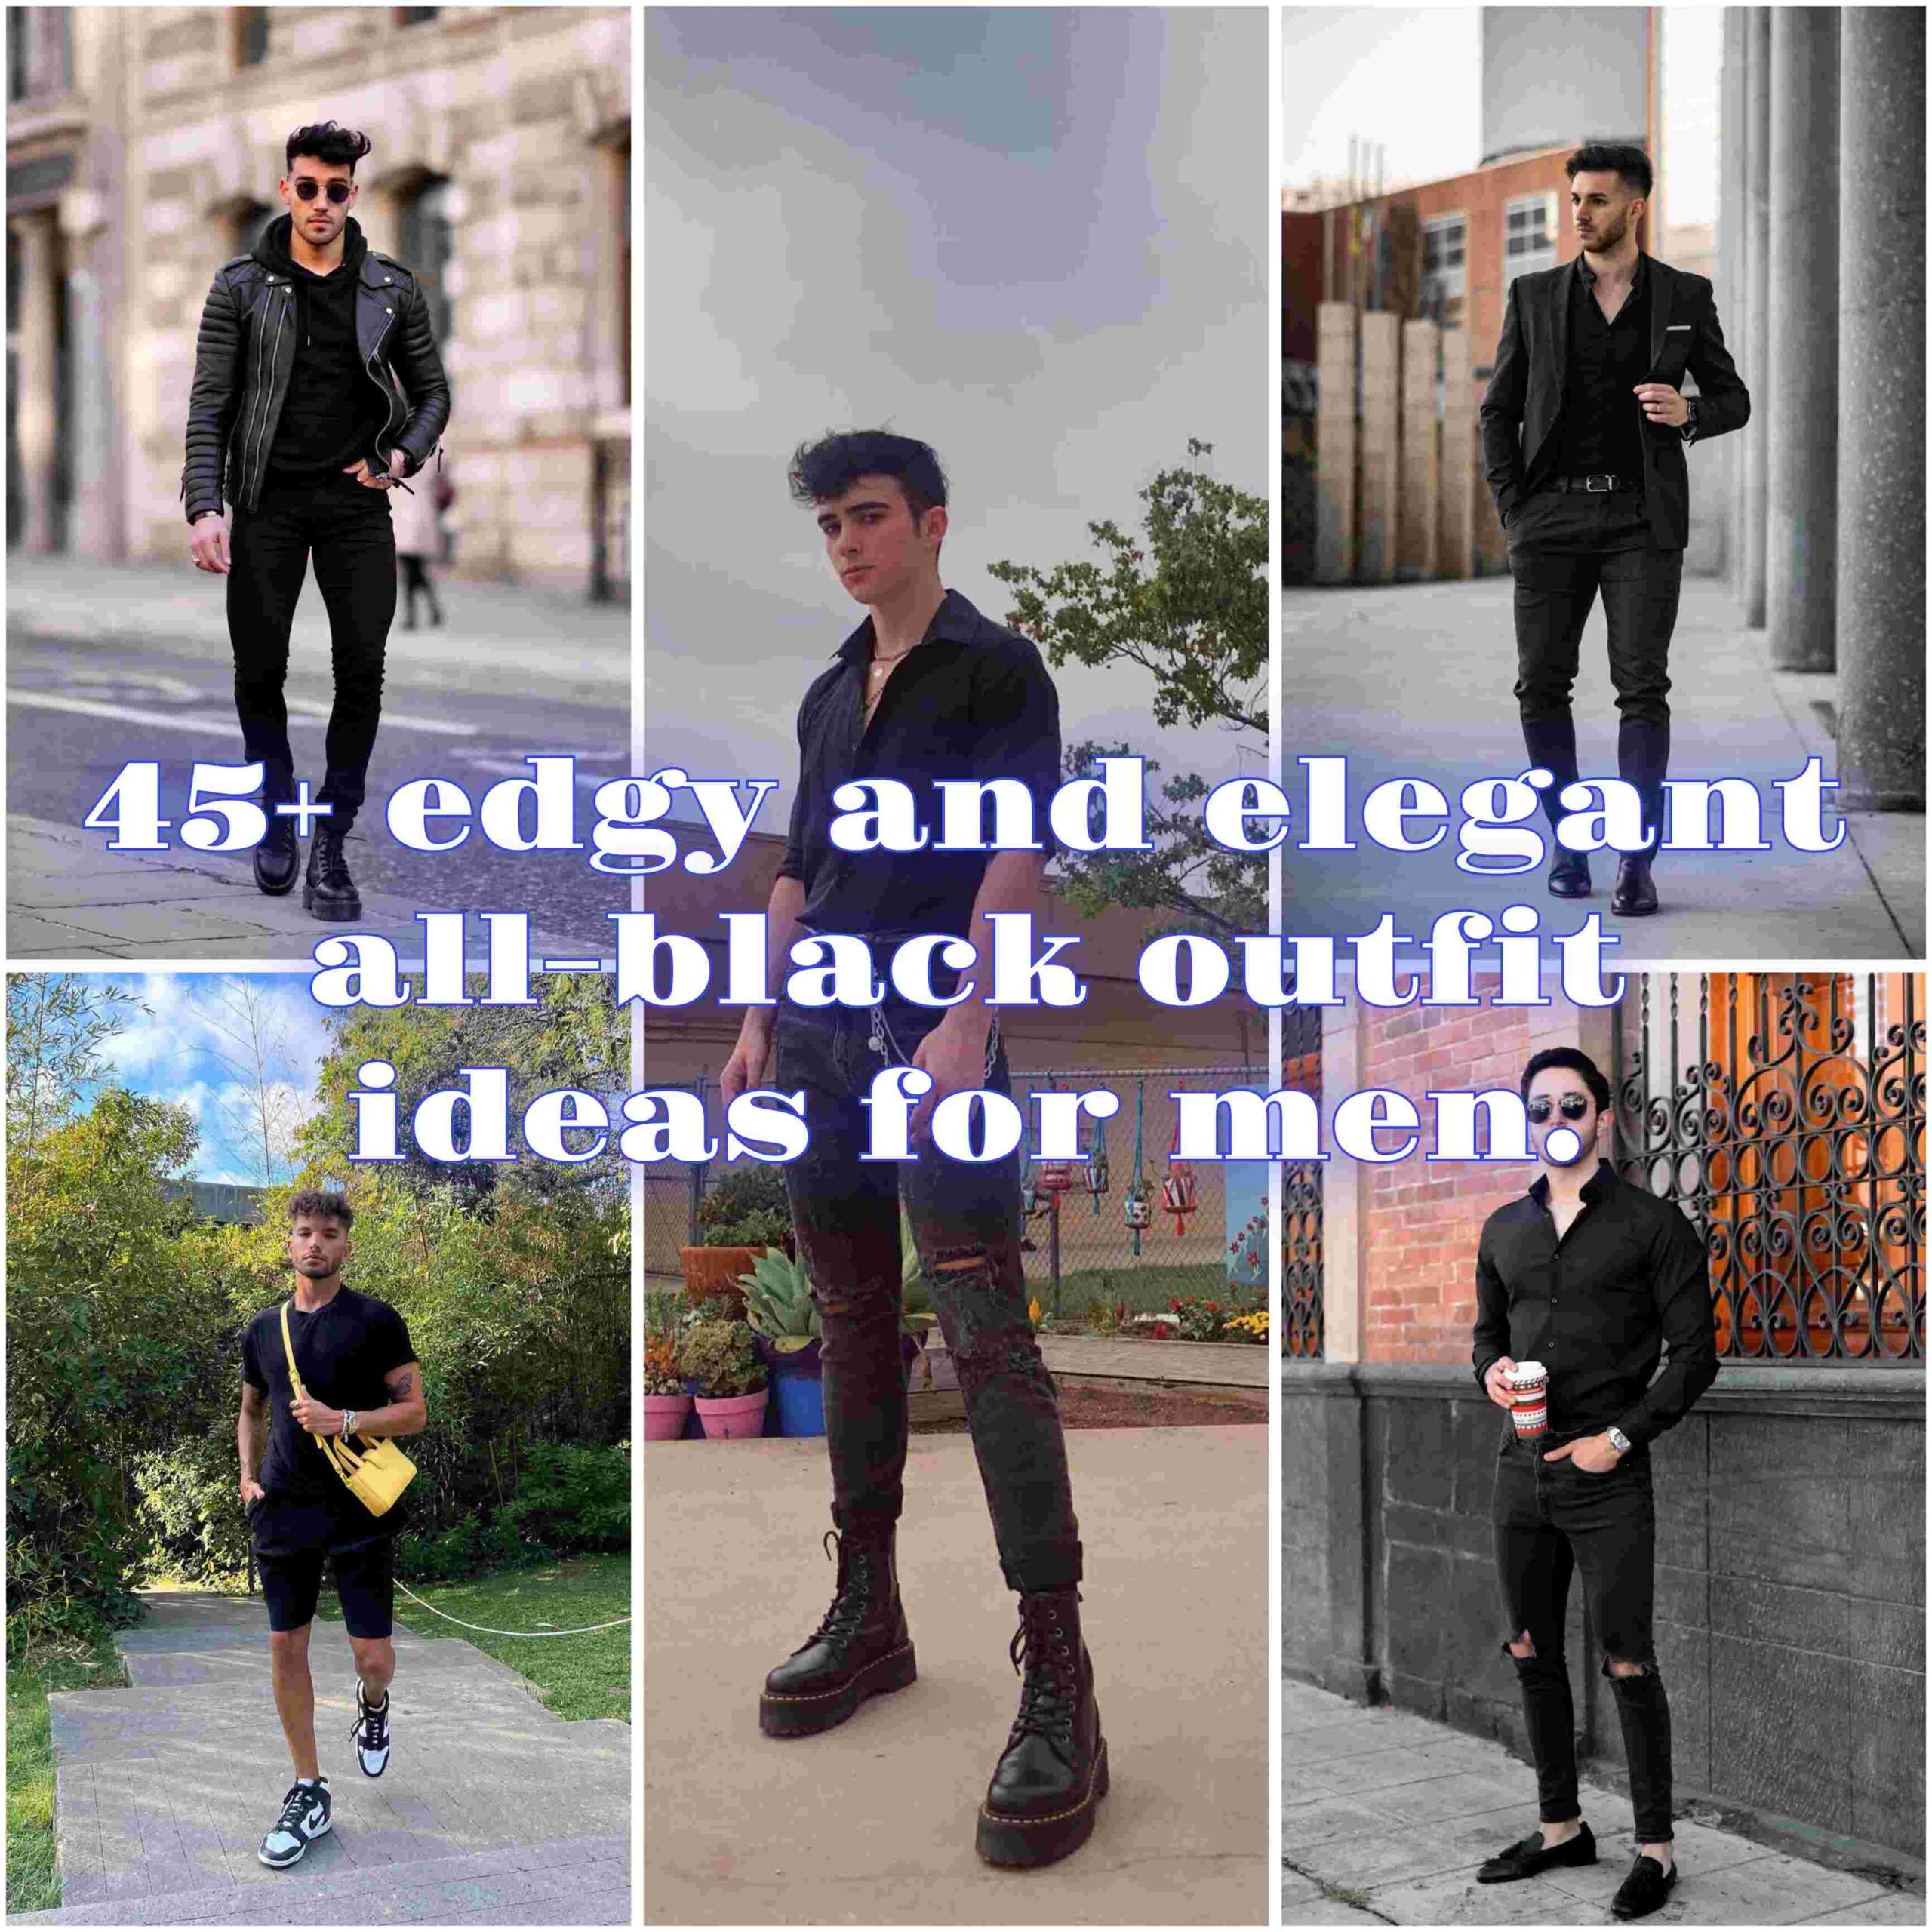 all-black outfit ideas for guys.